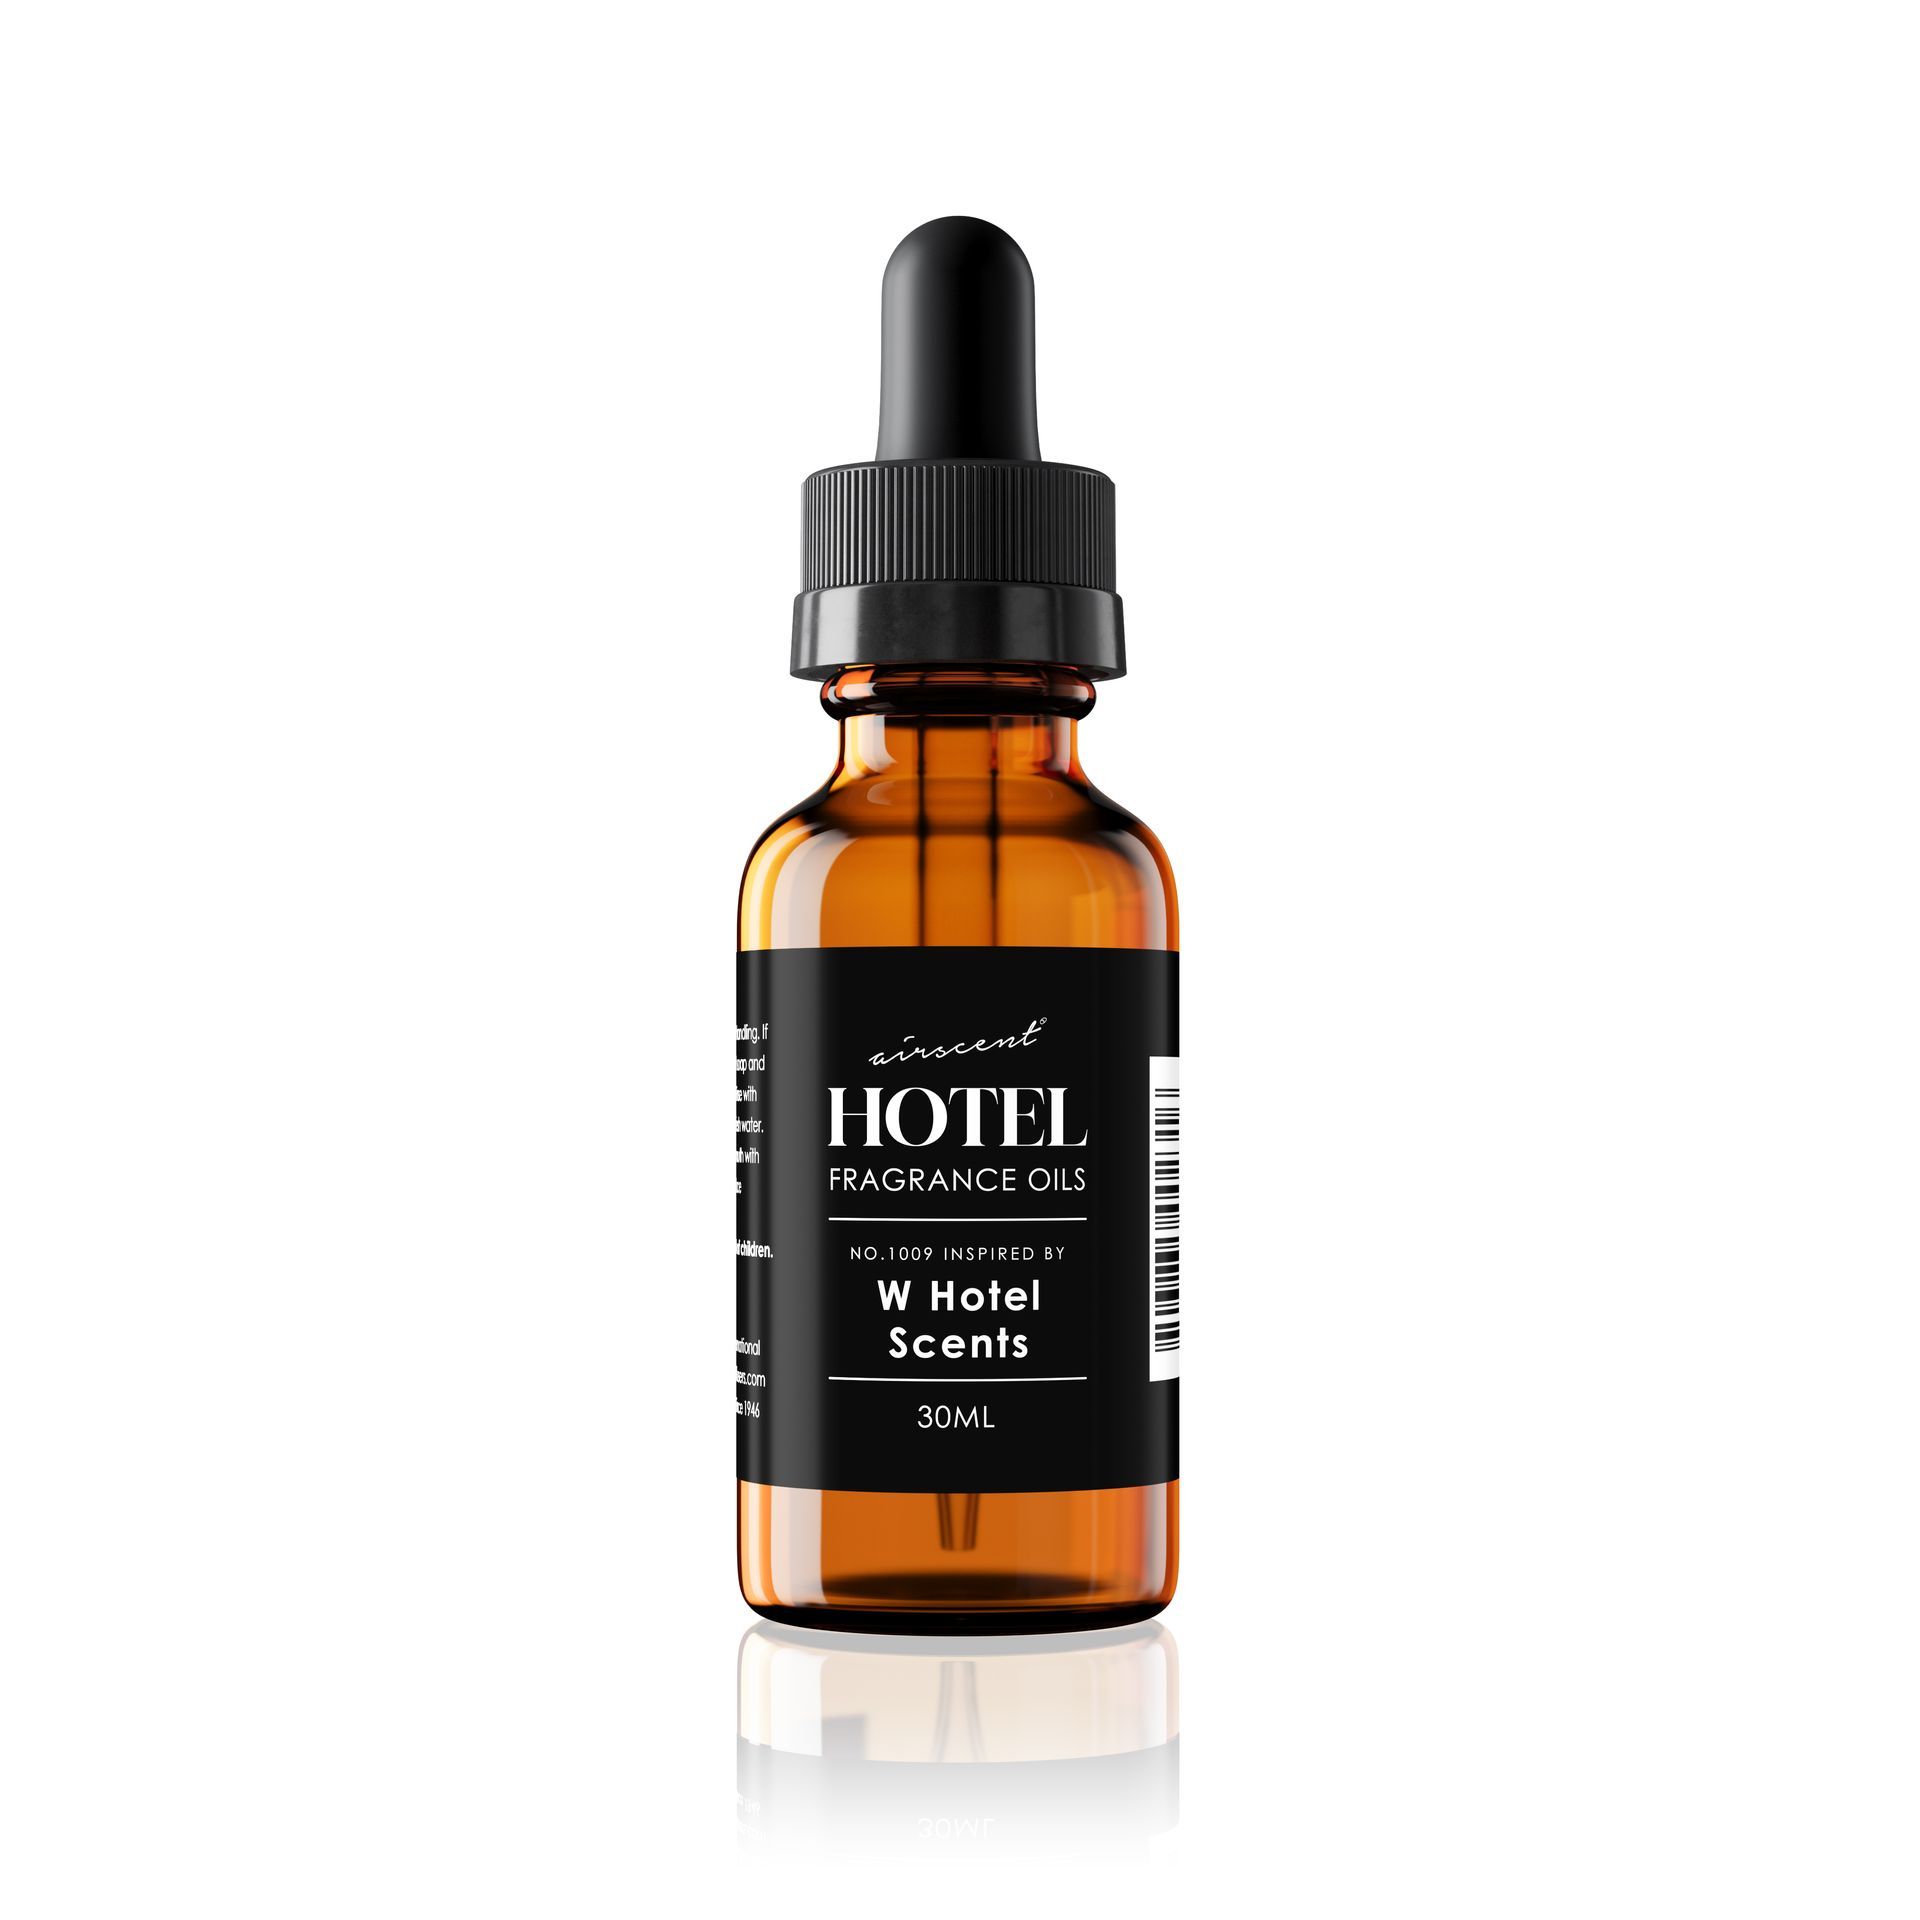 Hotel Aroma Diffuser Oil Inspired by W Hotel 30ML